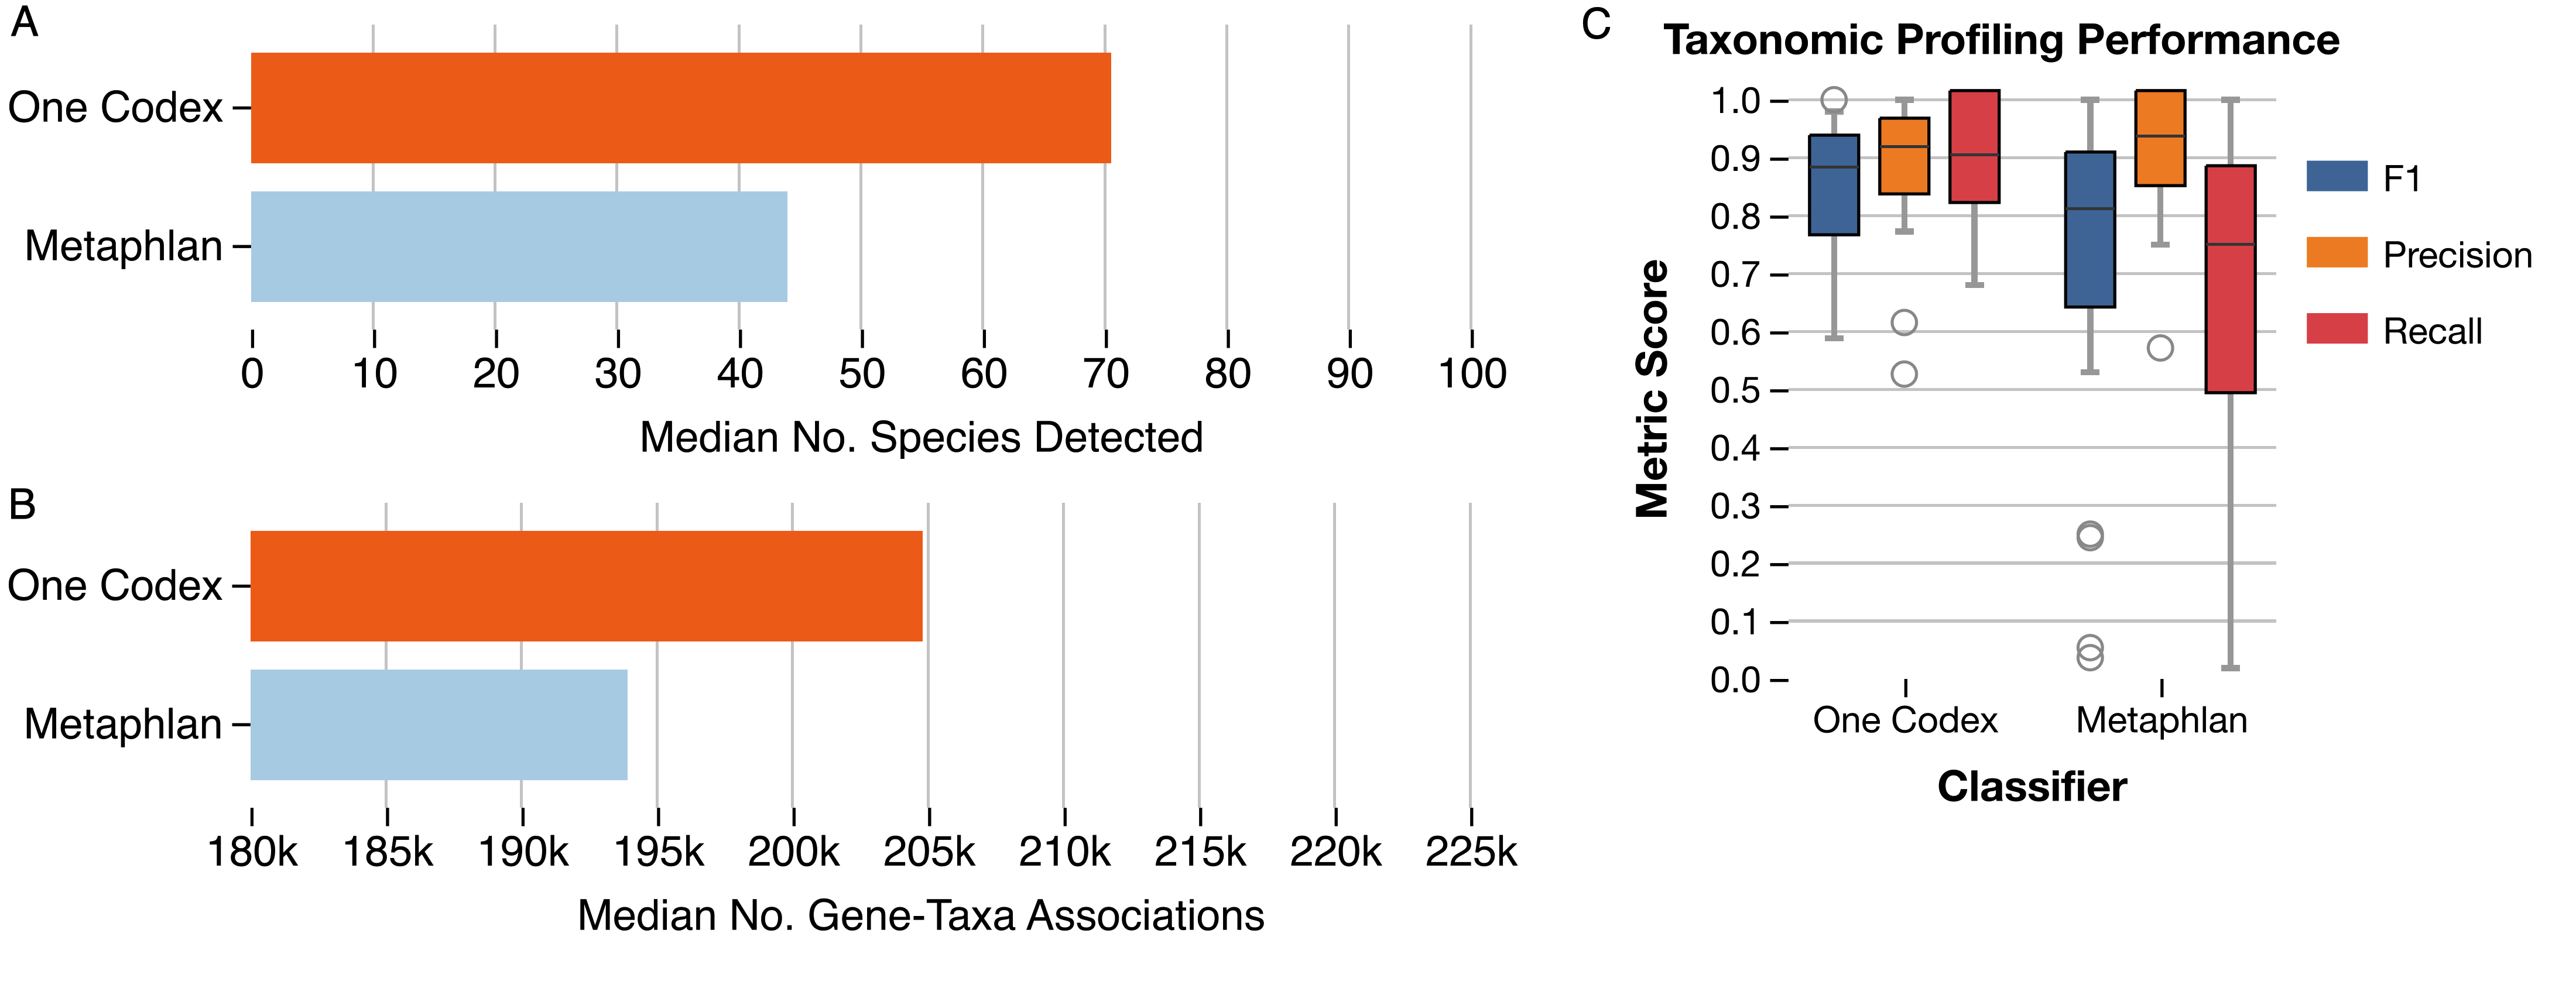 Figure 1: (A) Median number of species and (B) gene-taxa associations identified using the functional analysis pipeline and One Codex database, compared with the functional analysis and MetaPhlAn database. Data for this analysis was pulled from a subset of the Integrative Human Microbiome Project4. Profiling performance was assessed using mock community samples from McIntyre et al5. (C) F1, Precision and Recall of taxonomic profiling when classifying using One Codex compared with MetaPhlAn, demonstrating similar a false positive rate despite significant more taxa detected.